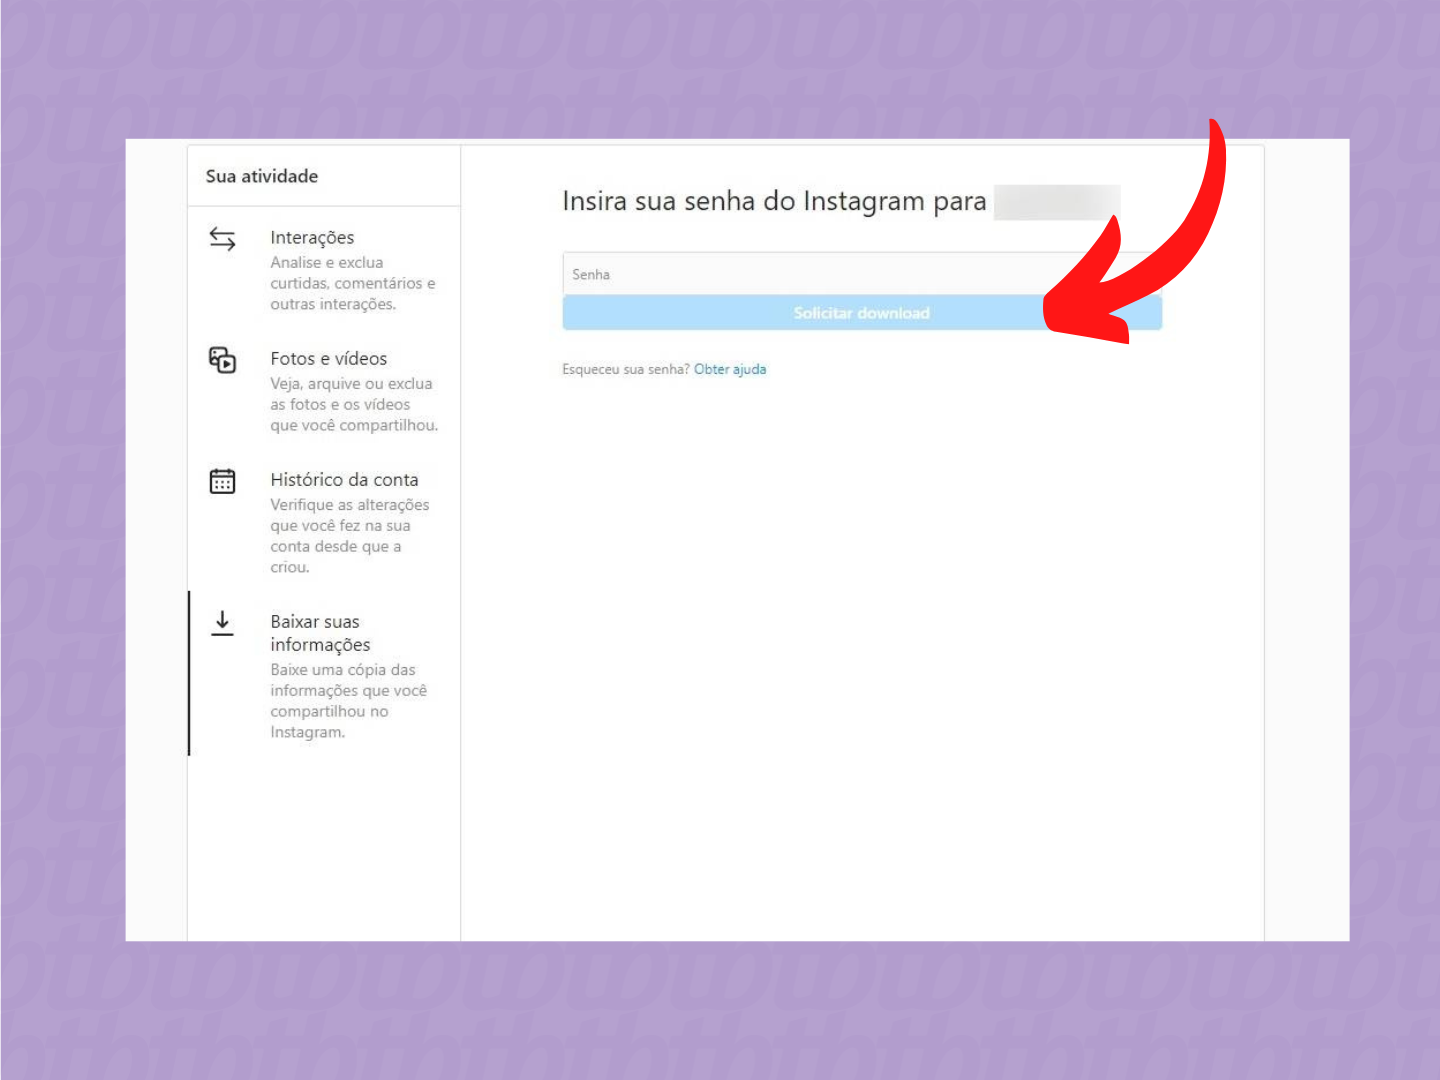 How to save an Instagram/Instagram/Playback photo and video backup